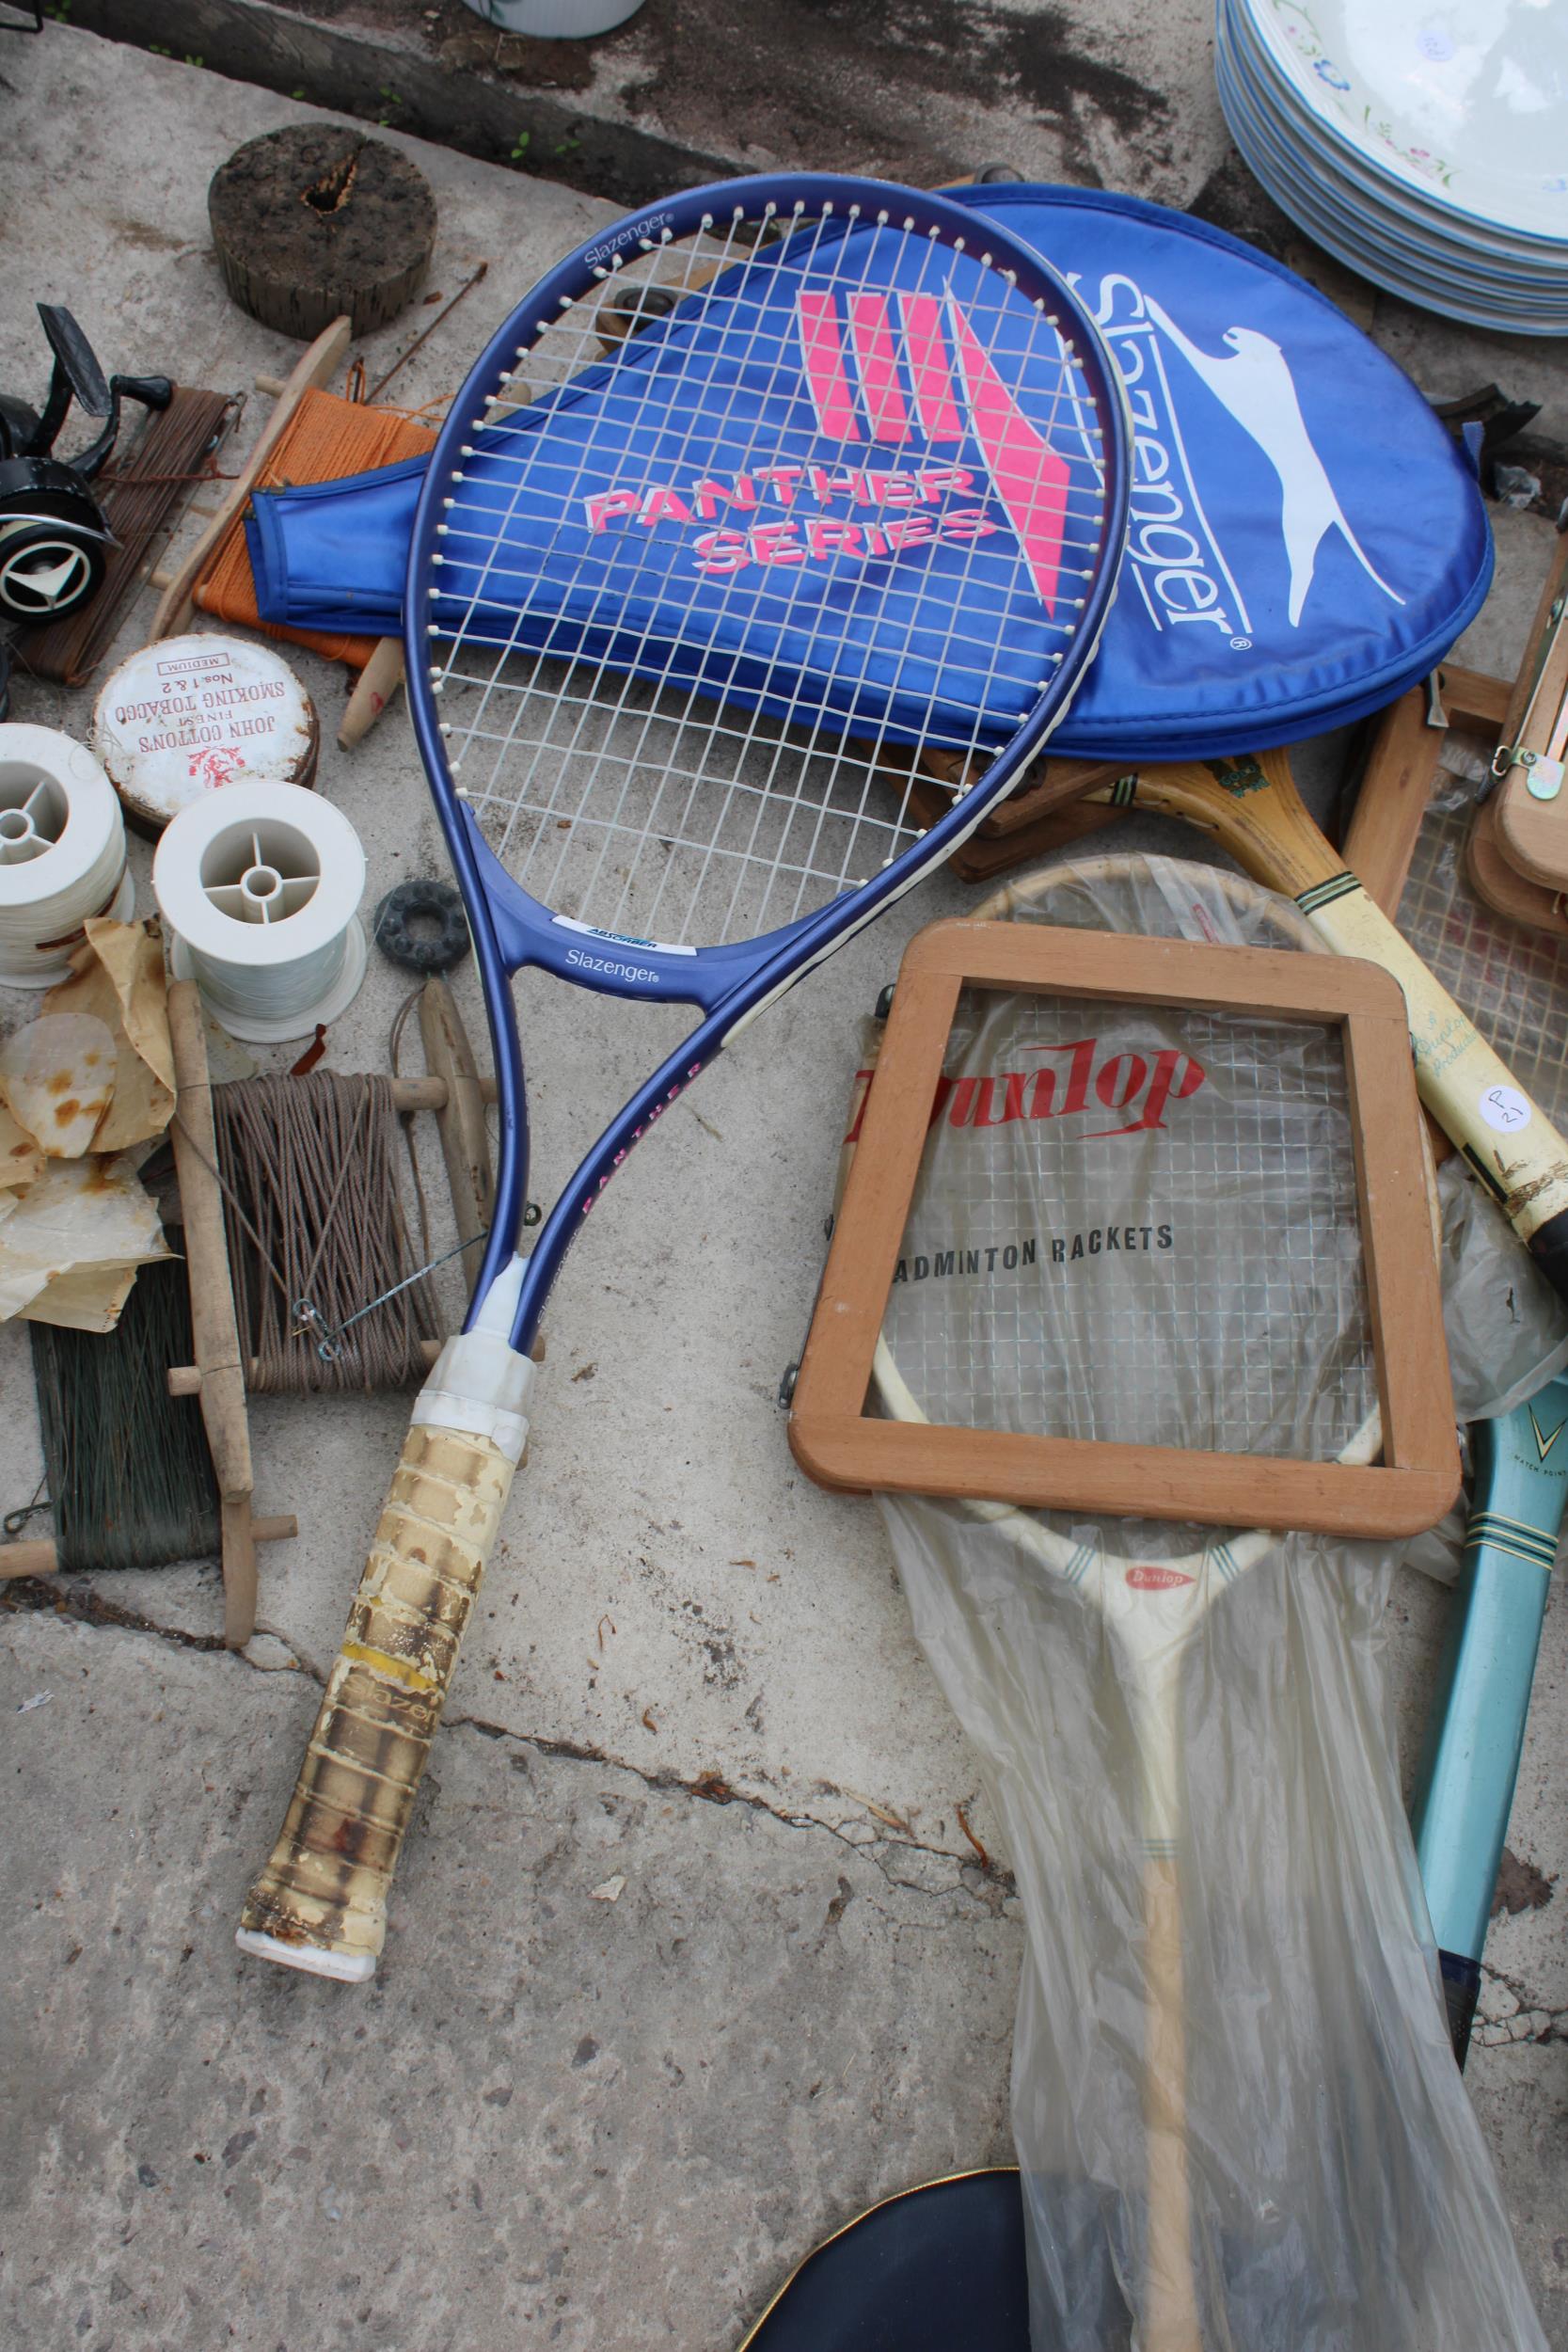 AN ASSORTMENT OF TENNIS RACKETS AND FISHING TACKLE - Image 3 of 3